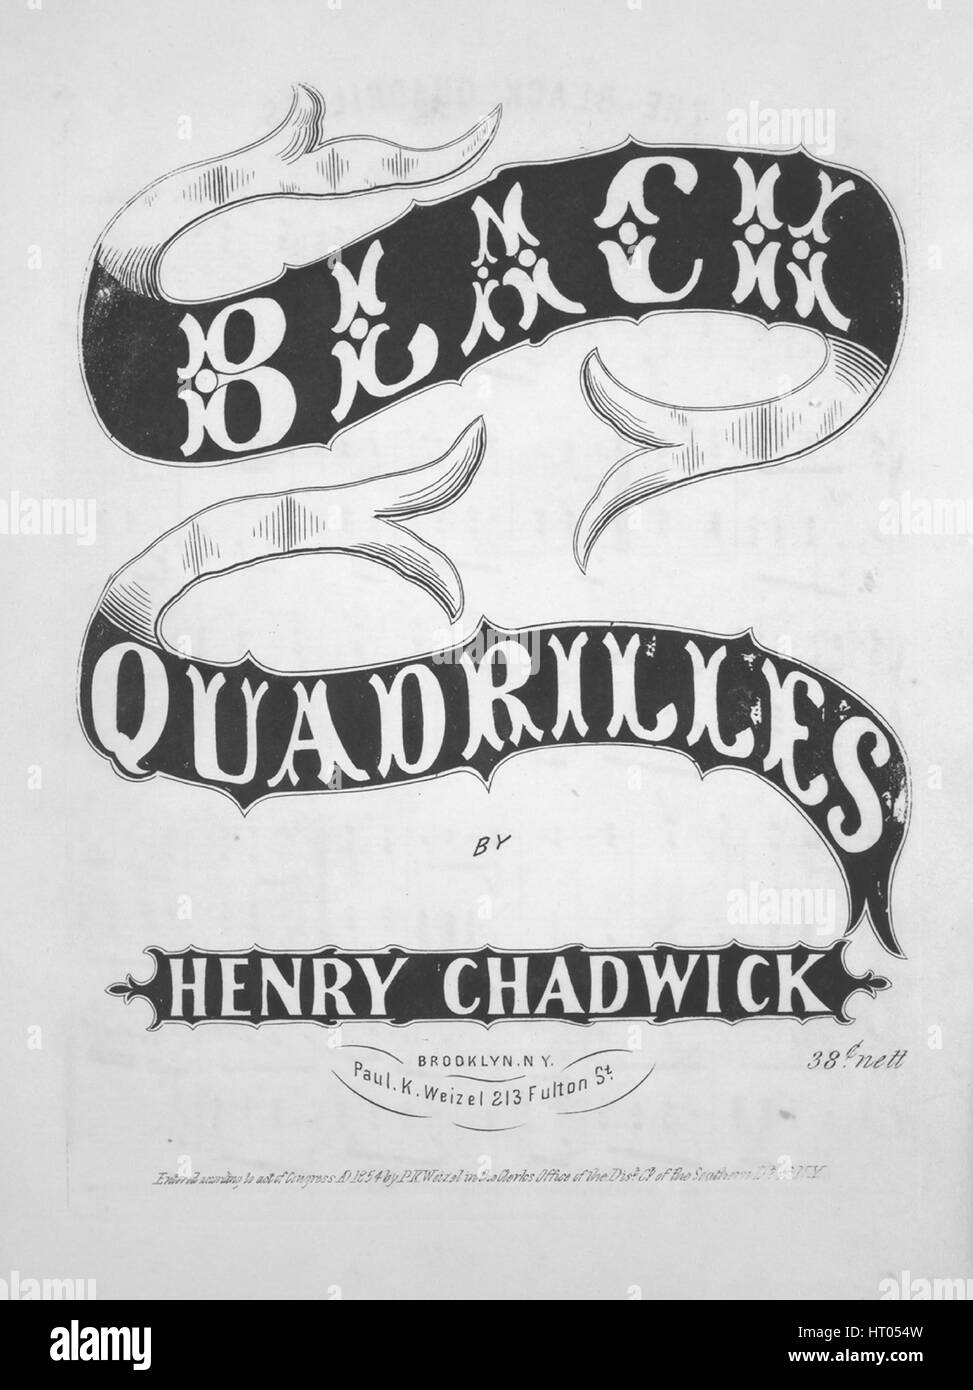 Sheet music cover image of the song 'No1 Fi, Yi! Yi!! Series  Black Quadrilles', with original authorship notes reading 'By Henry Chadwick', 1854. The publisher is listed as 'Paul K. Weizel, 213 Fulton St.', the form of composition is 'da capo', the instrumentation is 'piano', the first line reads 'None', and the illustration artist is listed as 'Pearson Eng'r'. Stock Photo